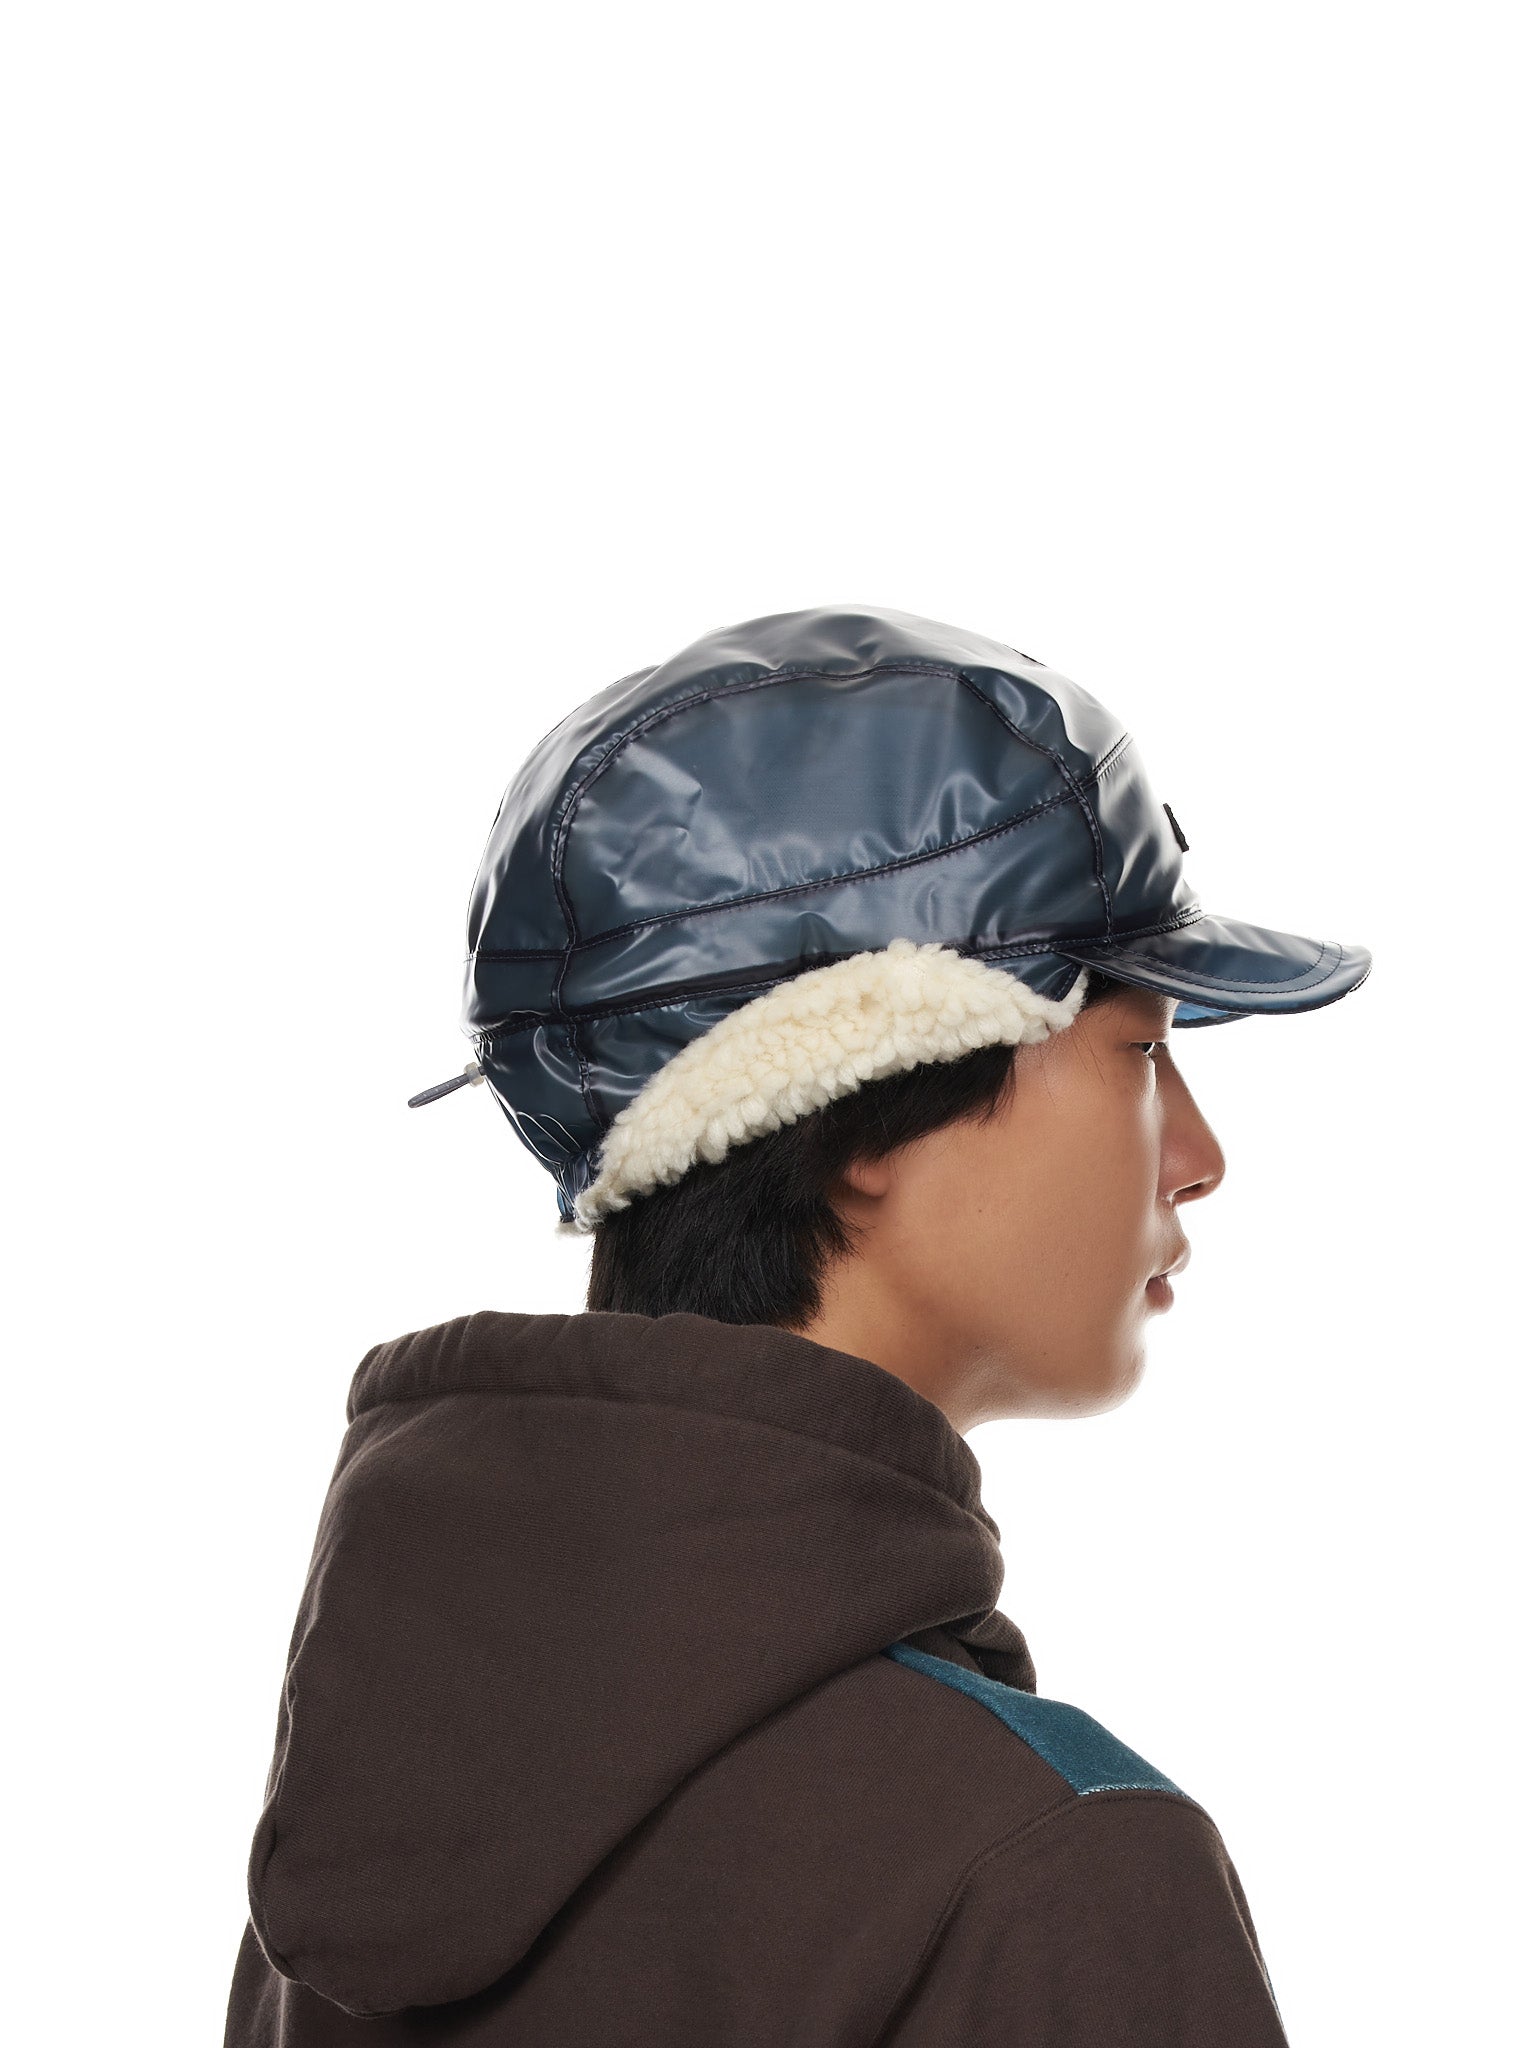 Undercover Flap Tactical Hat | H. Lorenzo - detail 2